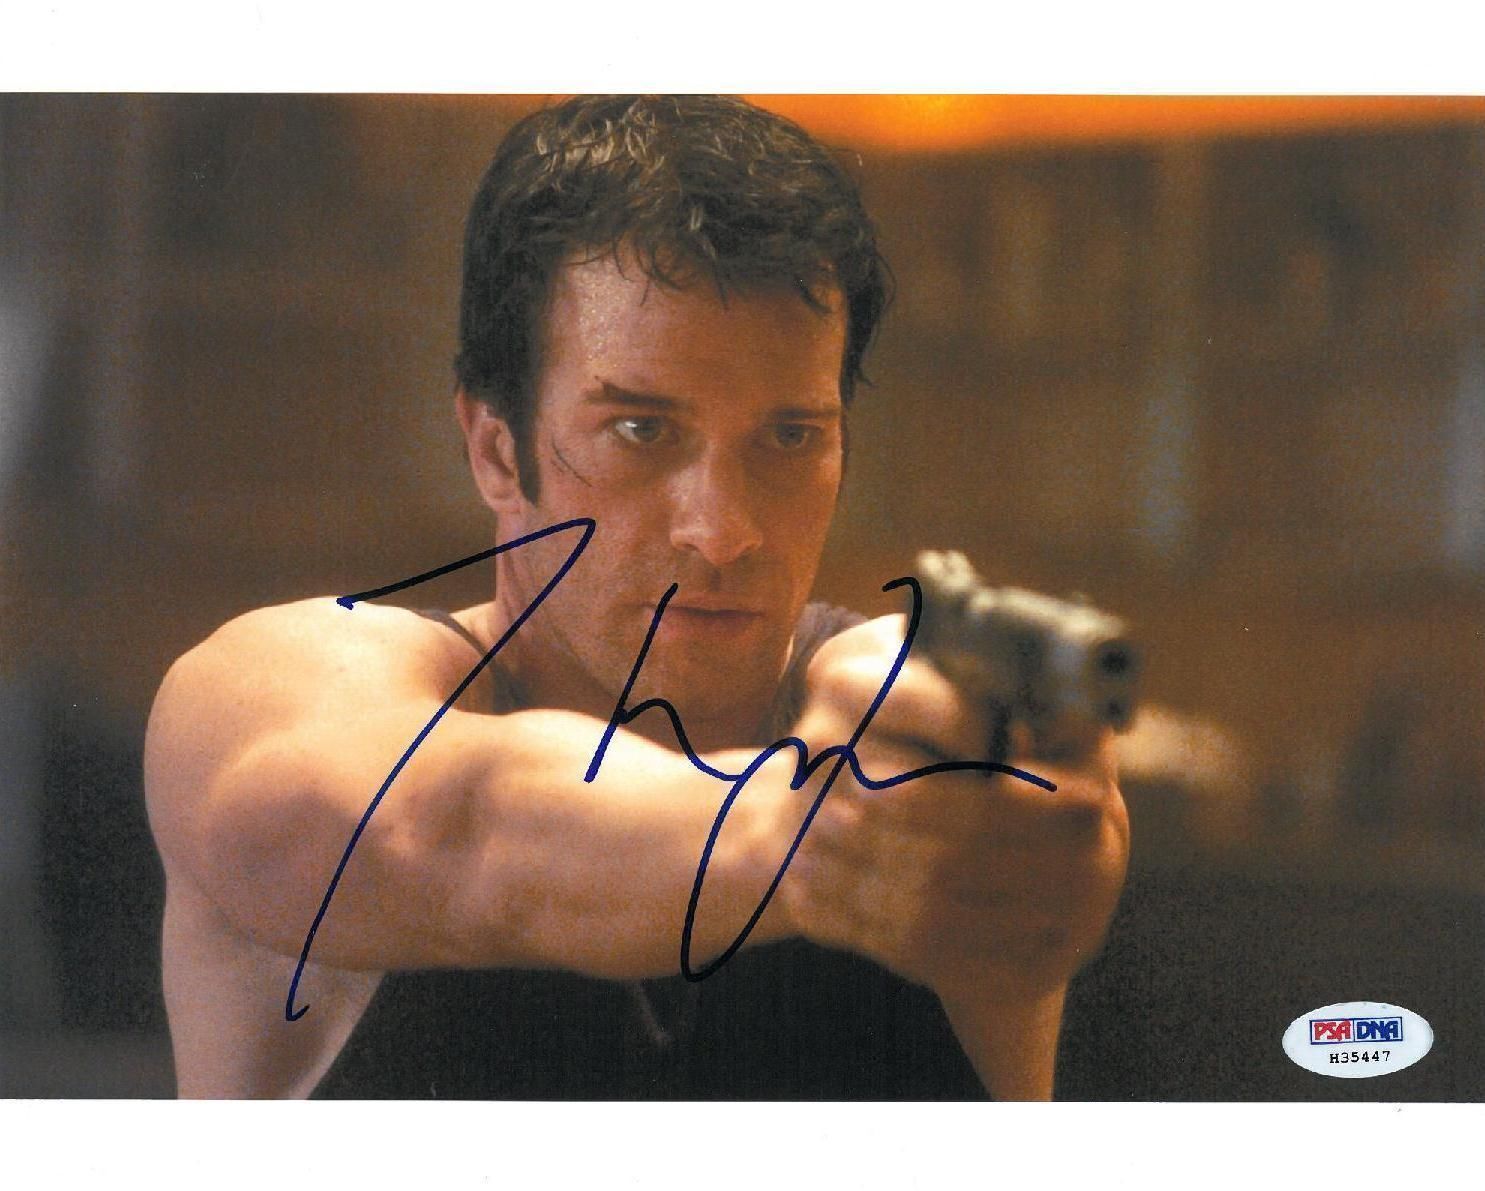 Thomas Jane Signed Punisher Authentic Autographed 8x10 Photo Poster painting (PSA/DNA) #H35447